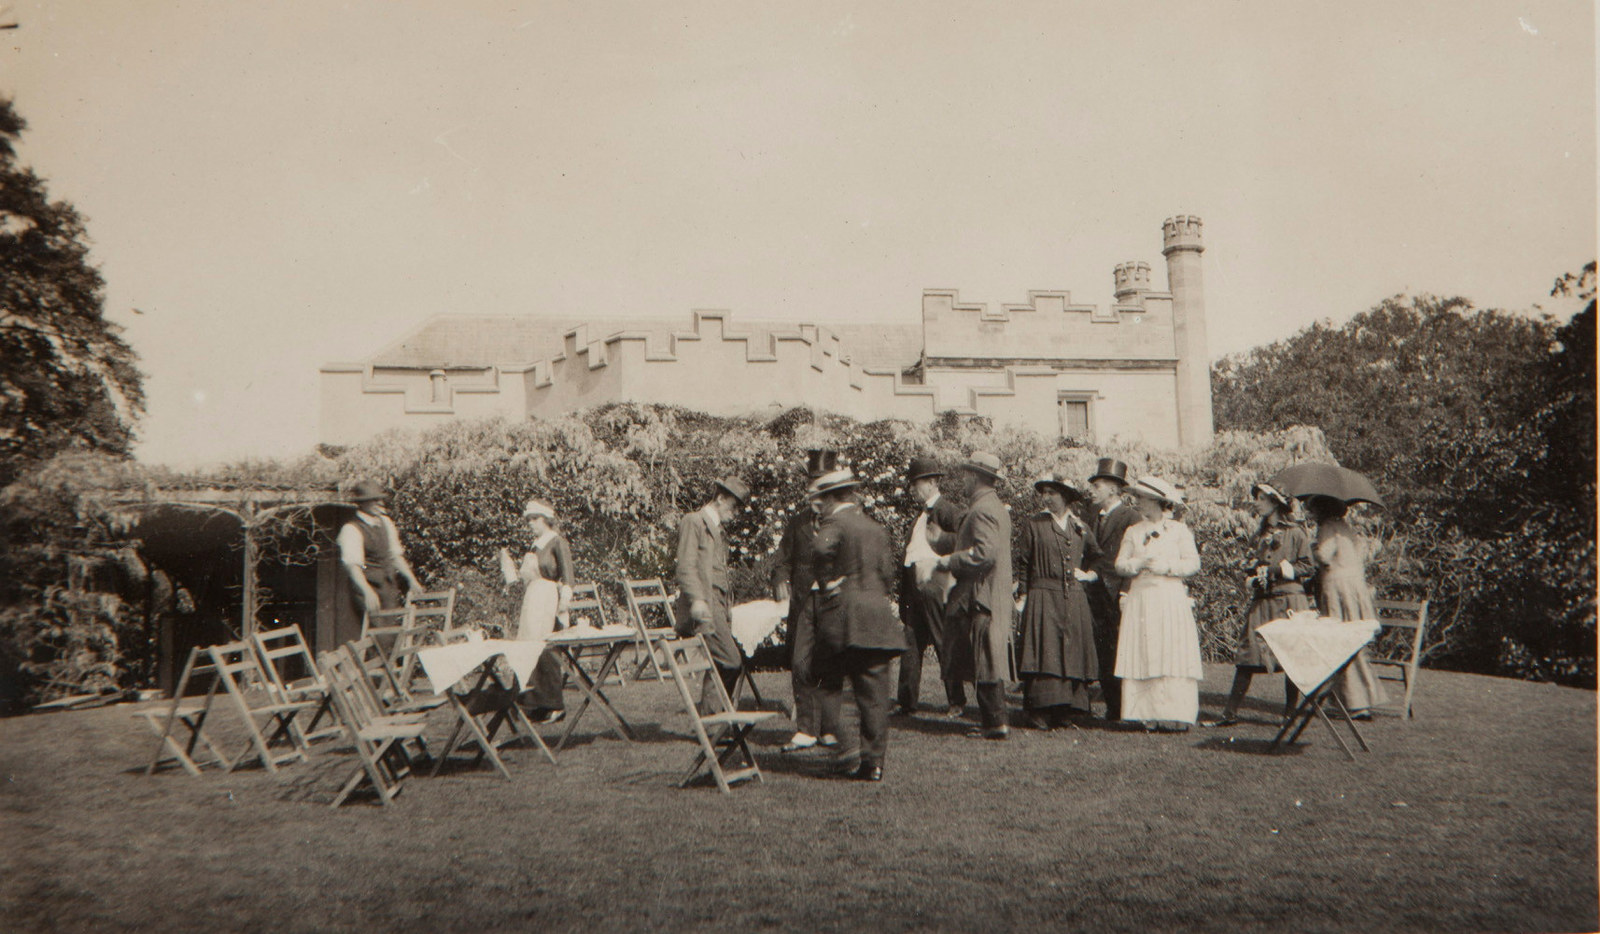 Tea party in front of wisteria: photograph taken at Vaucluse House around 1912, from 'Nielsen-Vaucluse Park Trust' photograph album, no.2.